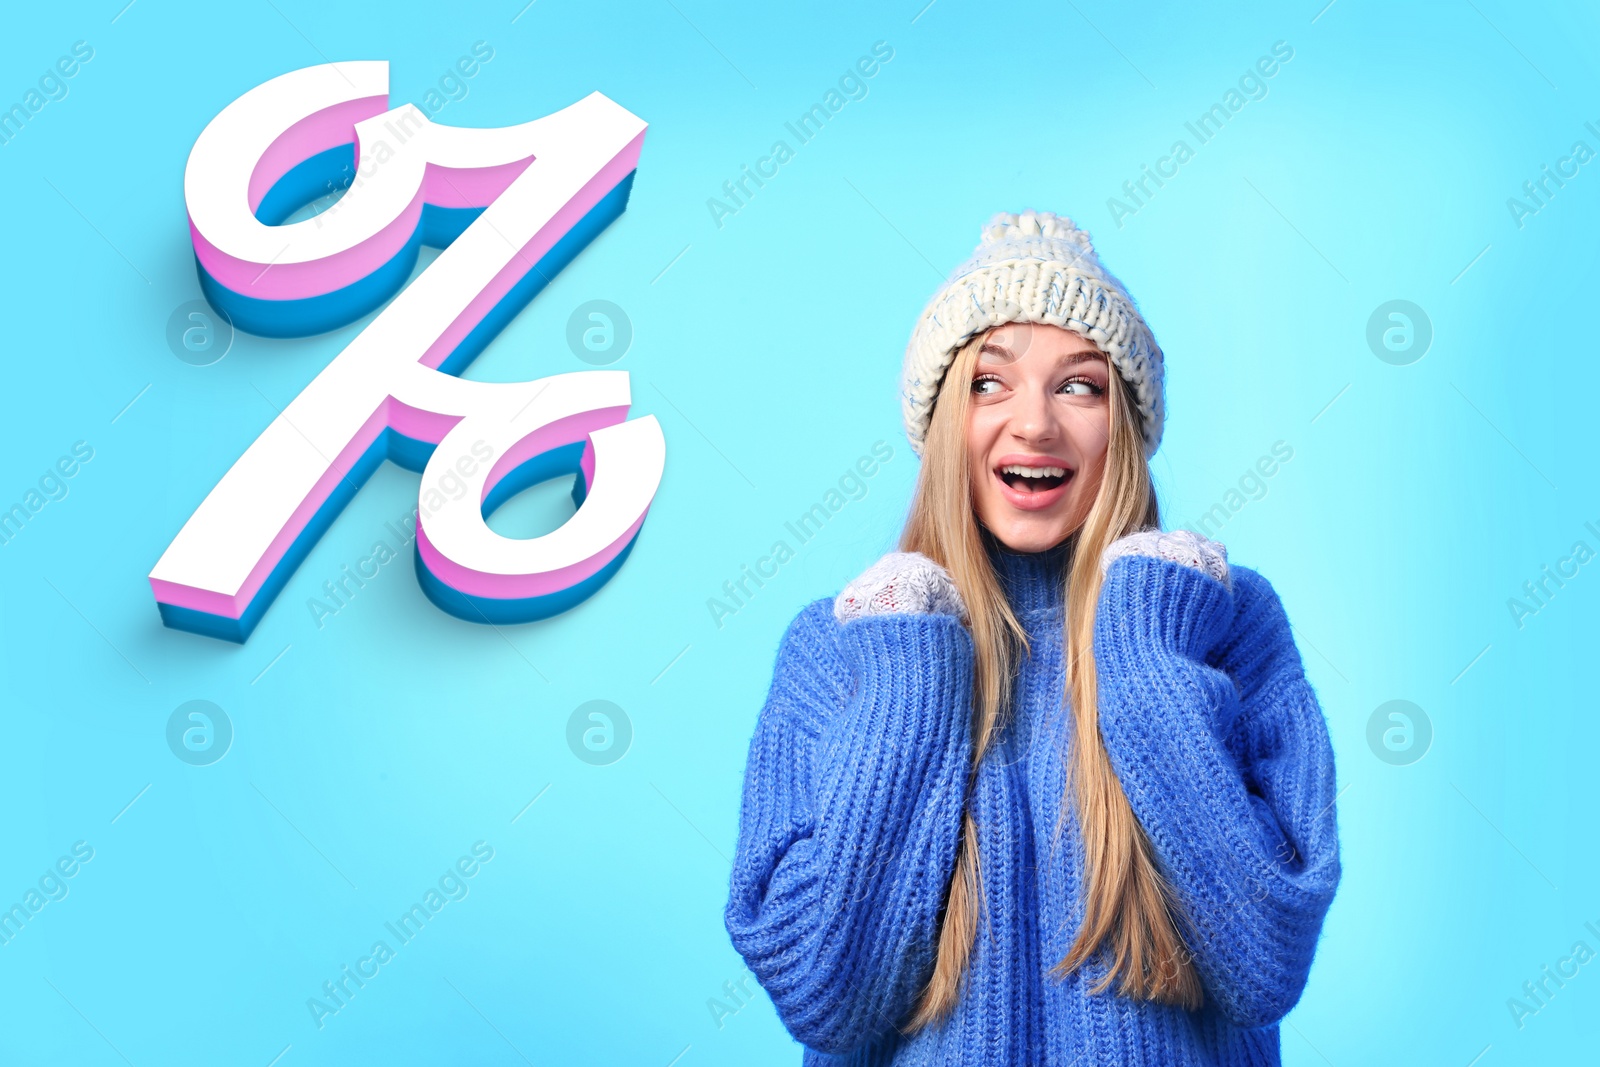 Image of Discount offer. Emotional woman in warm sweater and hat looking at percent sign on light blue background